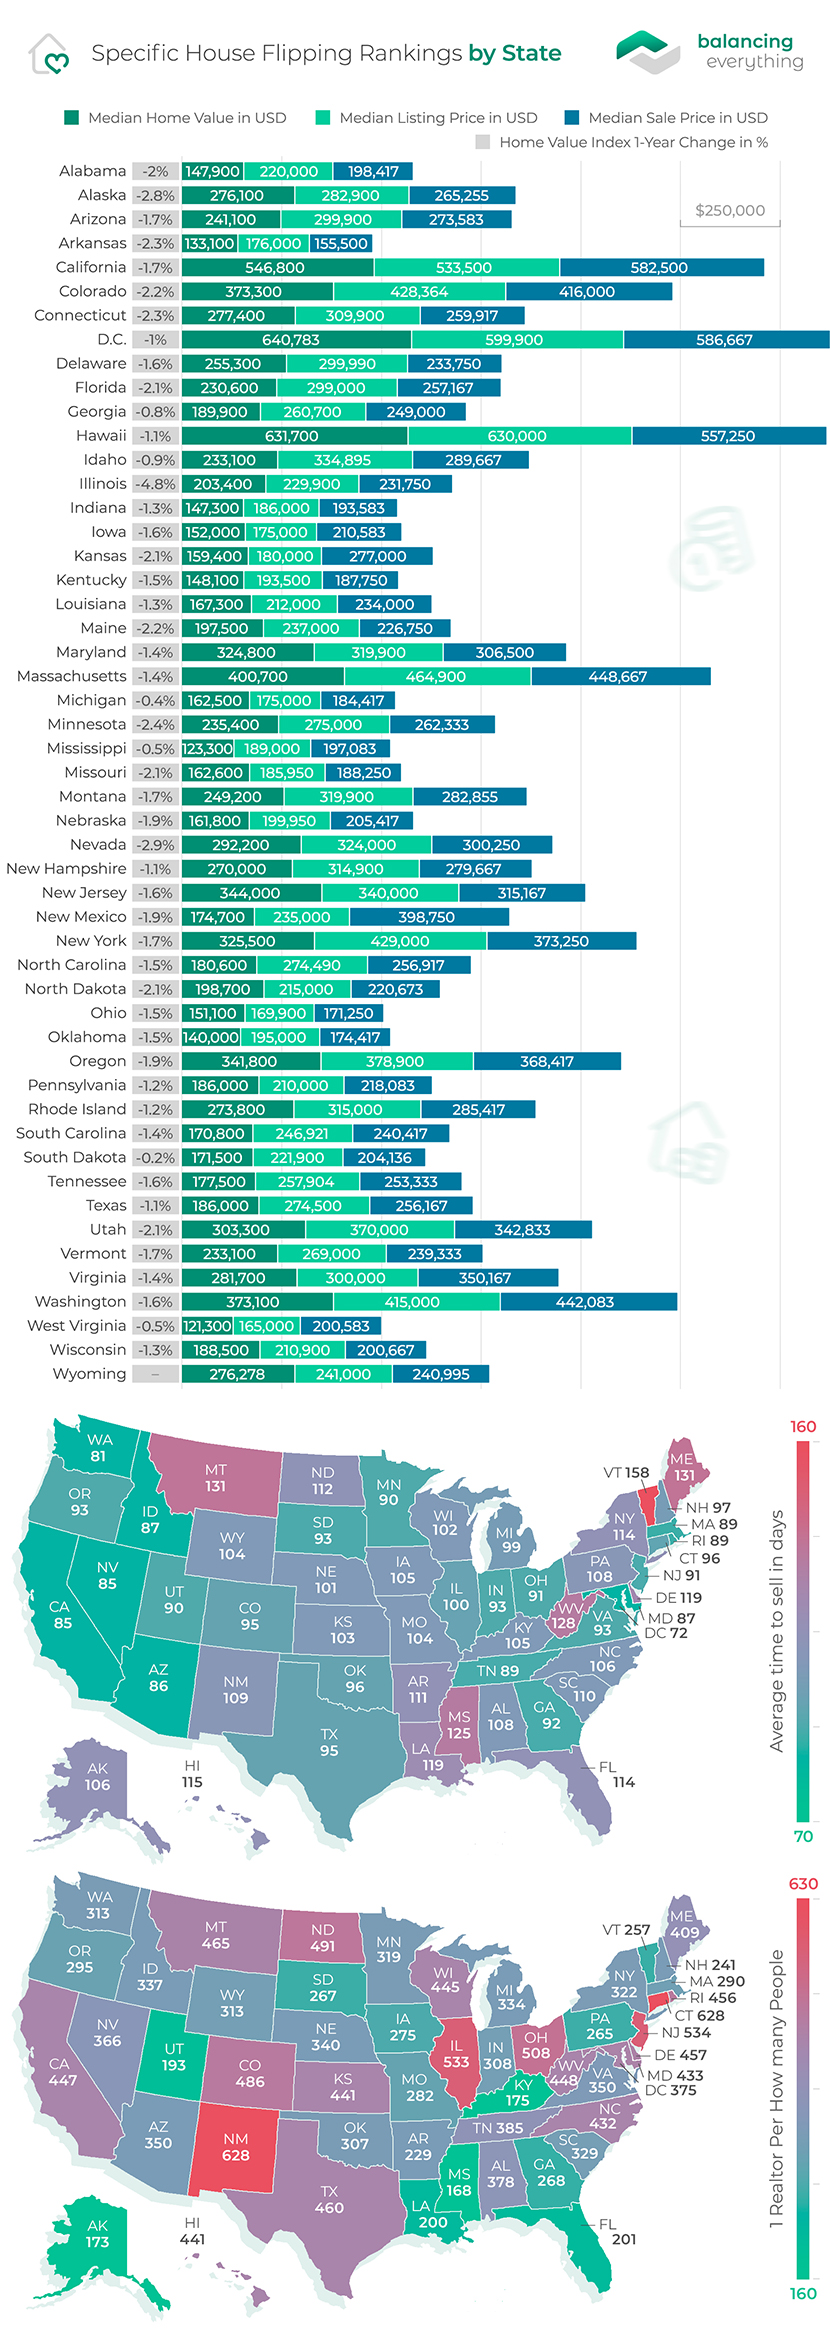 Specific House Flipping Rankings by State